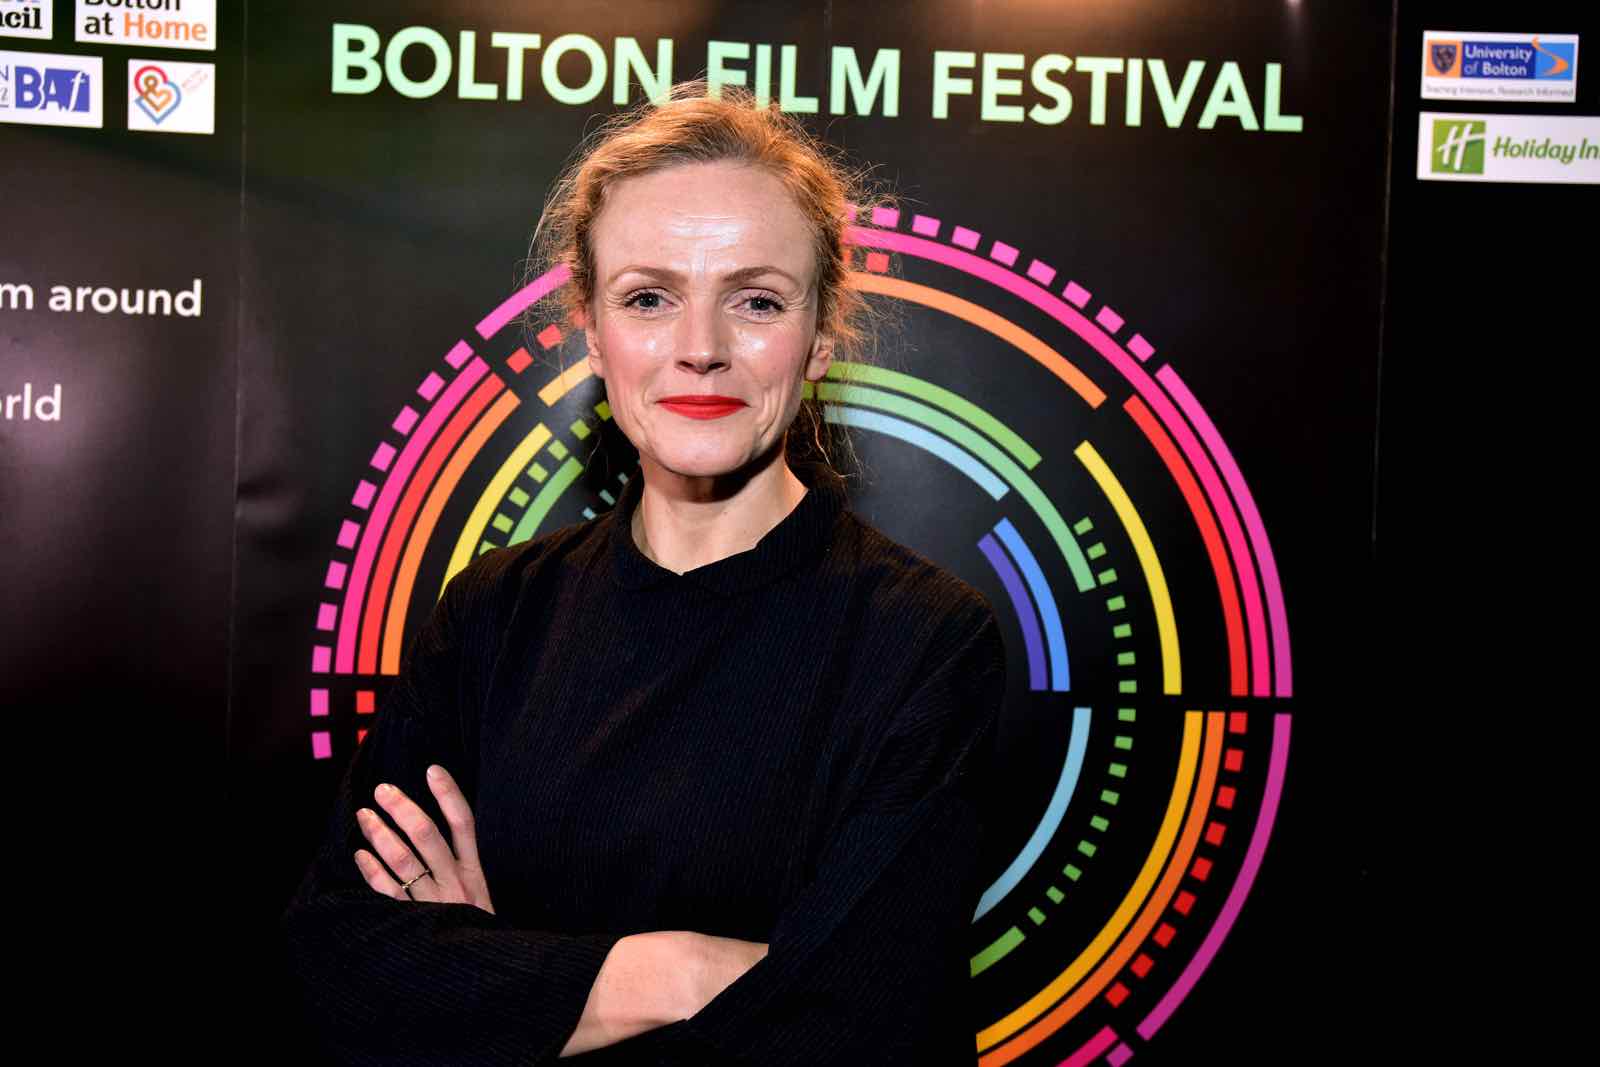 Bolton Film Festival is located in the UK and has been voted a “Top 100 reviewed” festival out of over 7,000 film festivals worldwide.